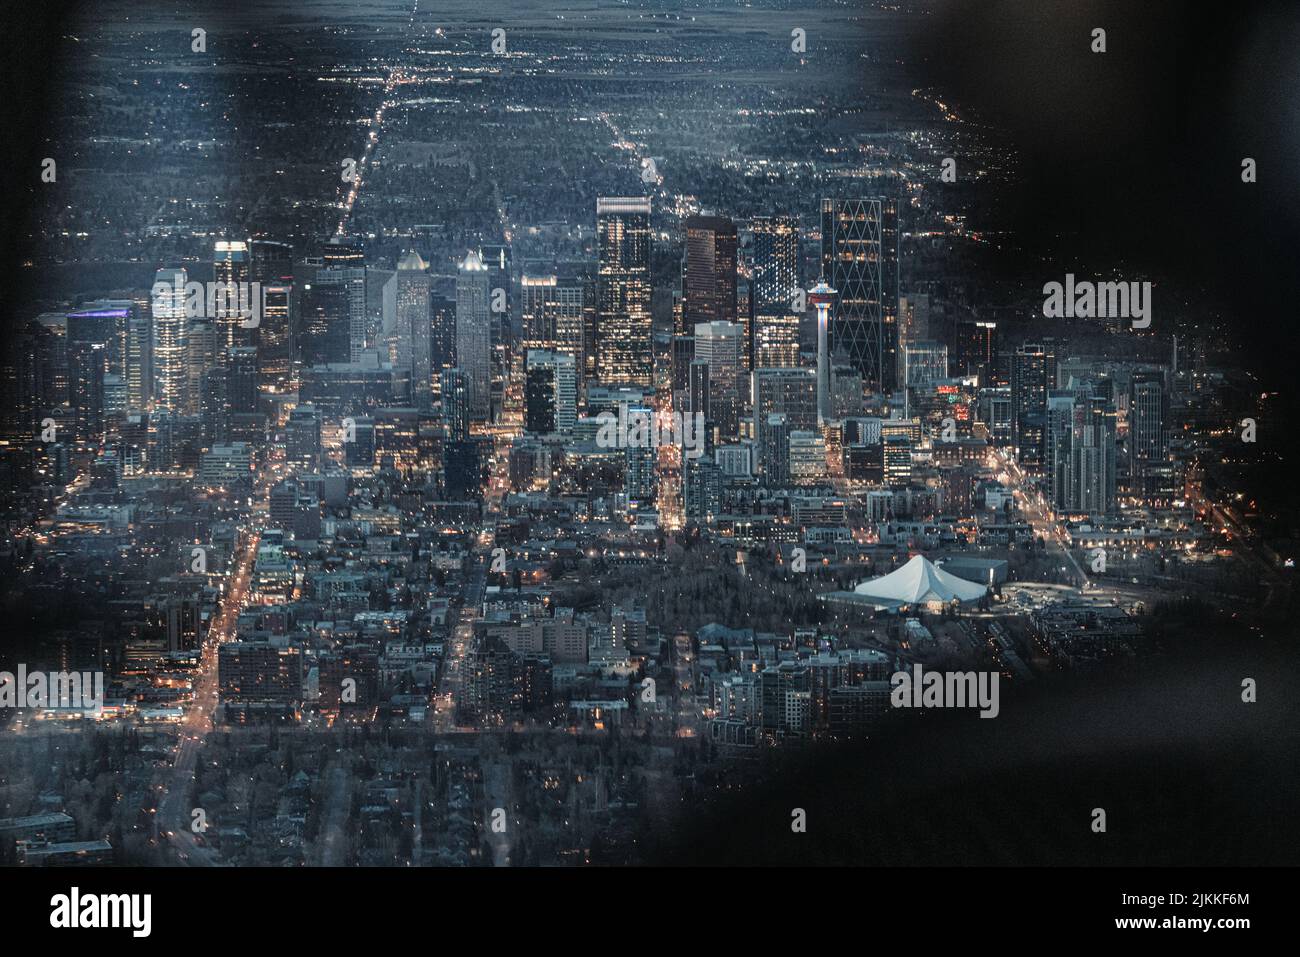 Aerial view of the downtown core and surrounding area at night. Stock Photo